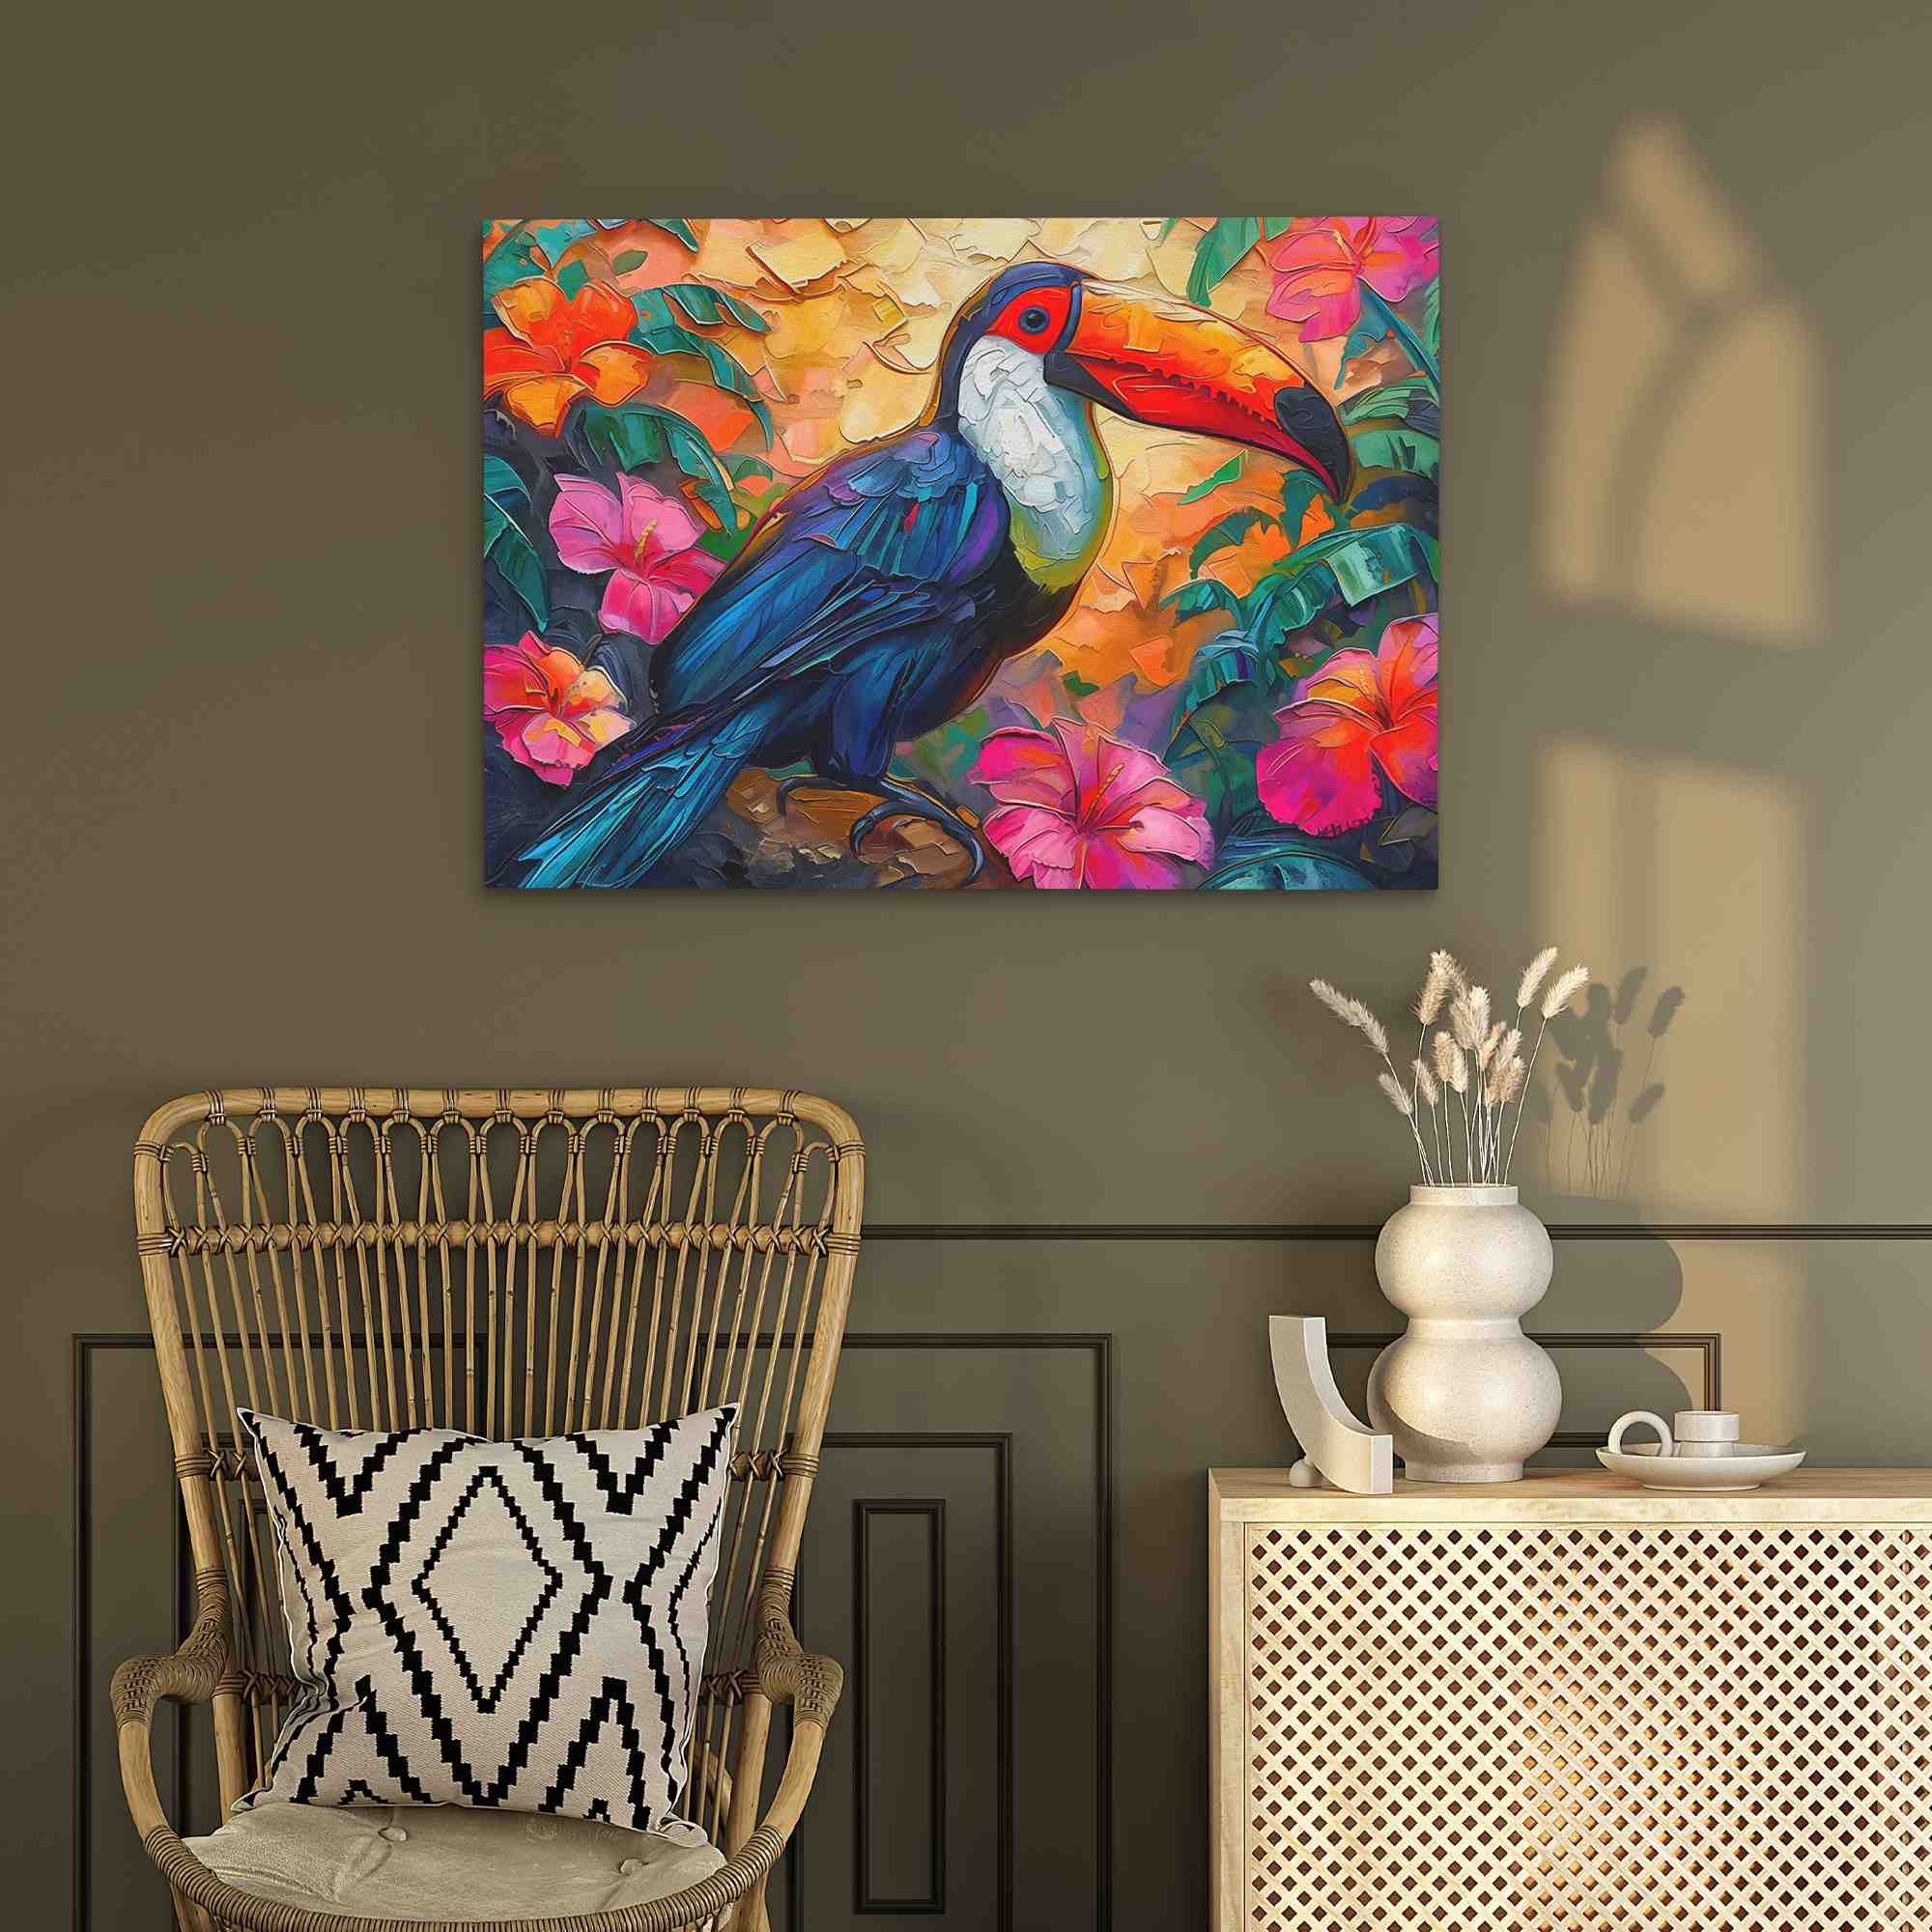 a painting of a toucan bird sitting on a branch